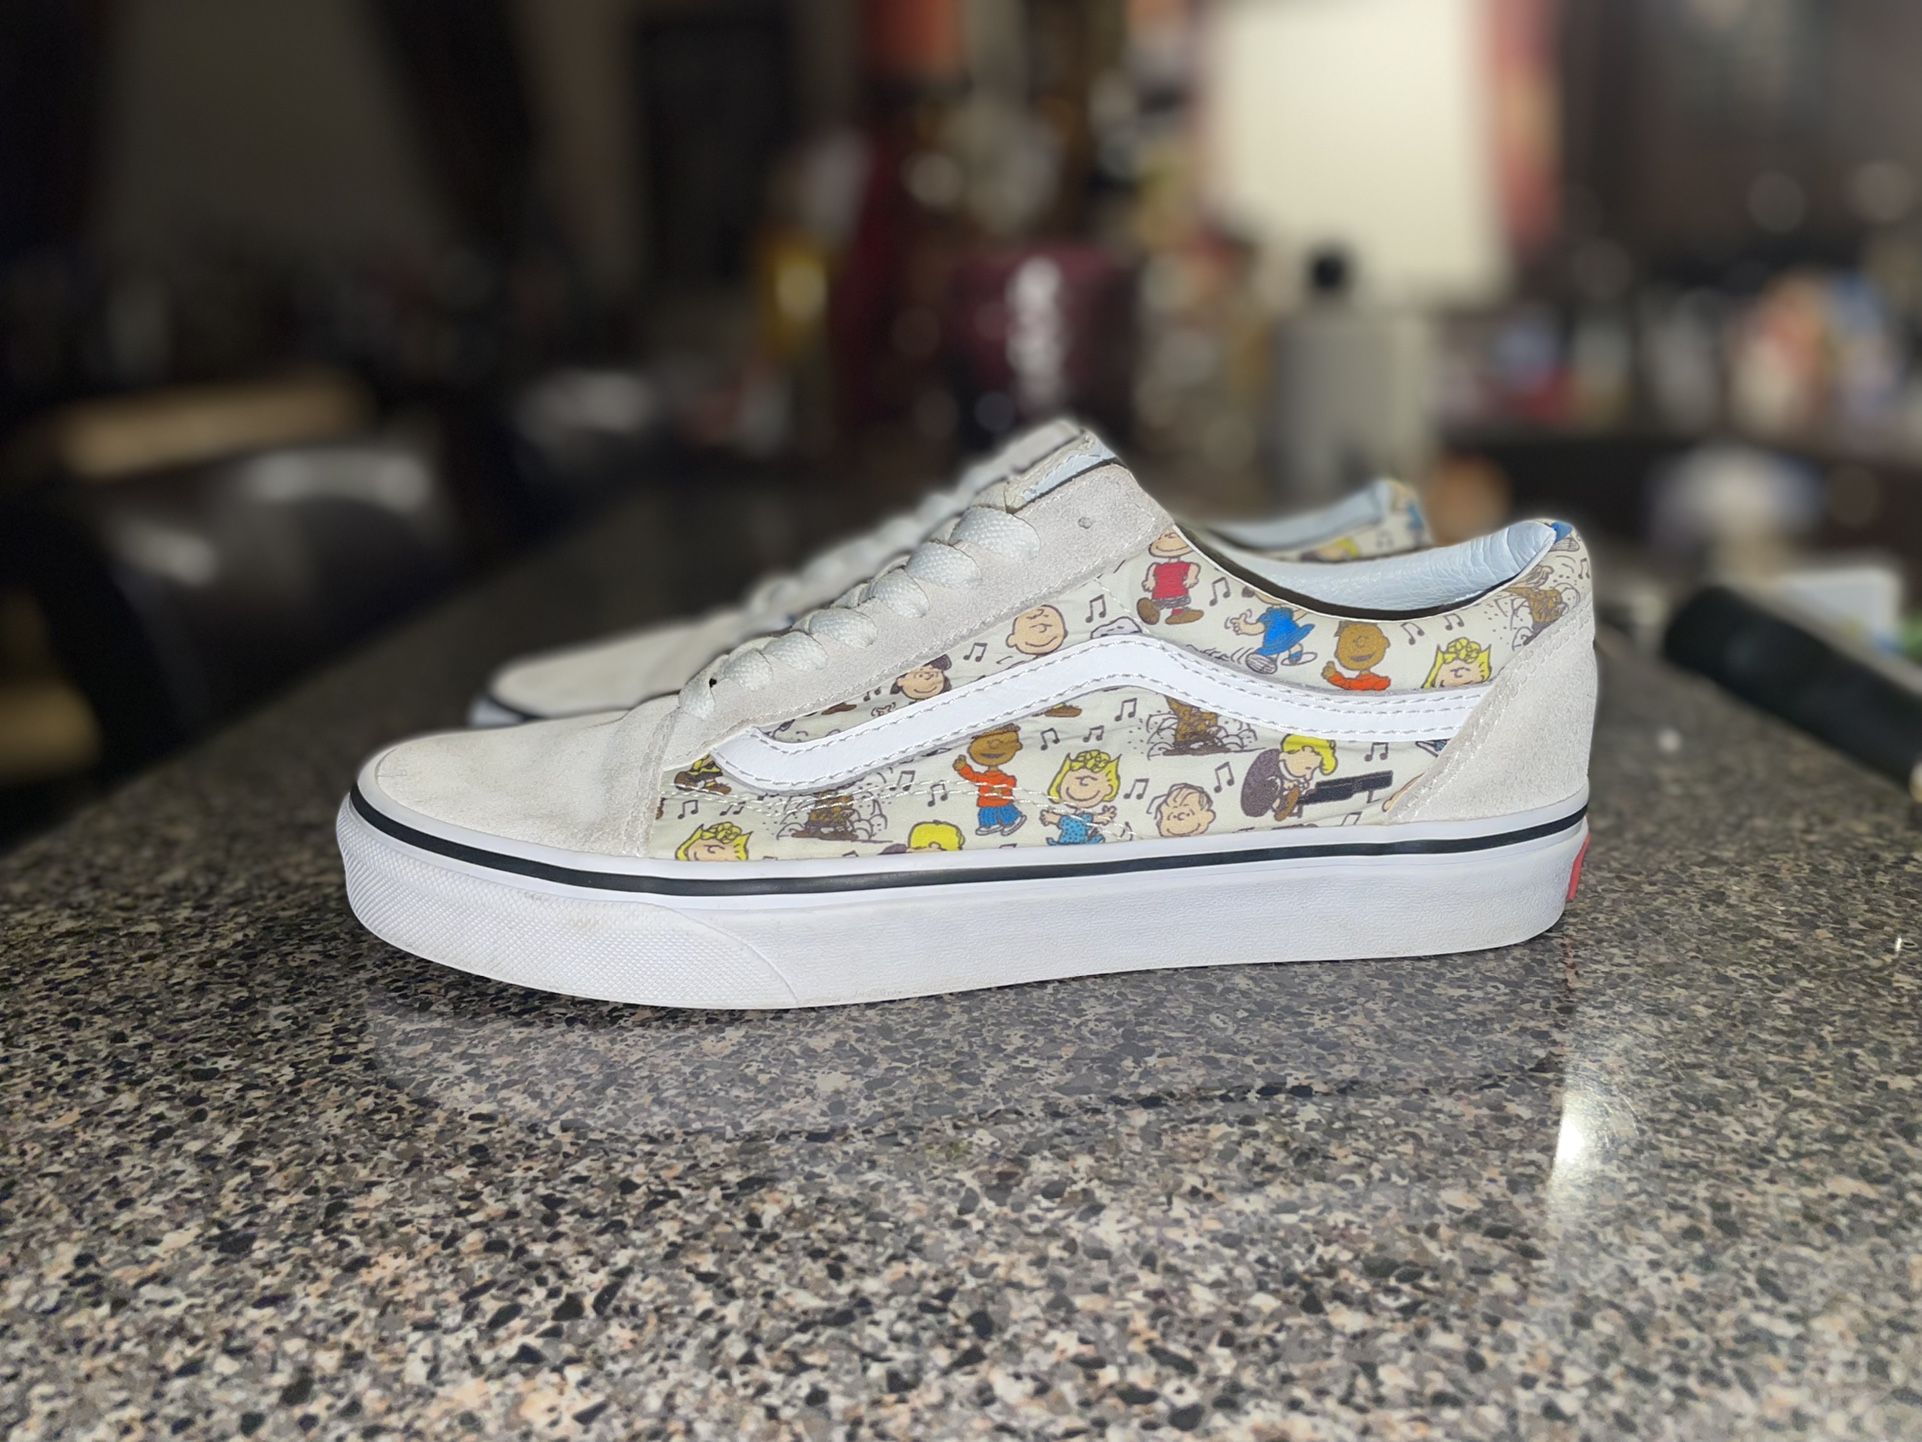 Vans x Peanuts Snoopy Comic Cartoon Skate Lmtd Edition Mens 6.5 Women's 8 for Sale in Halndle Bch, FL - OfferUp